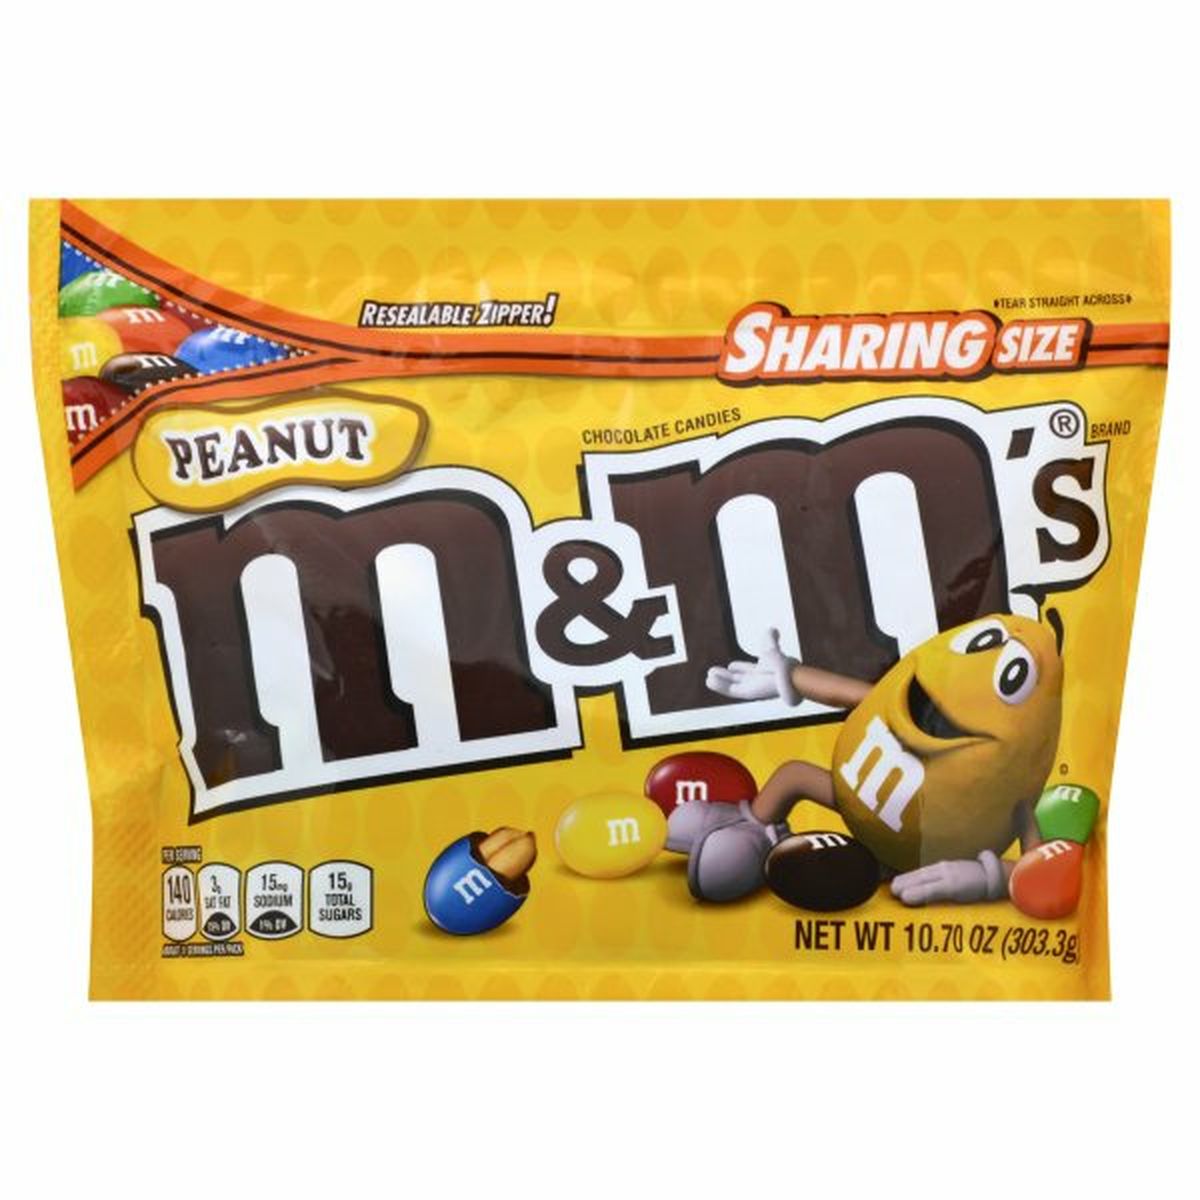 Calories in M&M's Chocolate Candies, Peanut, Sharing Size